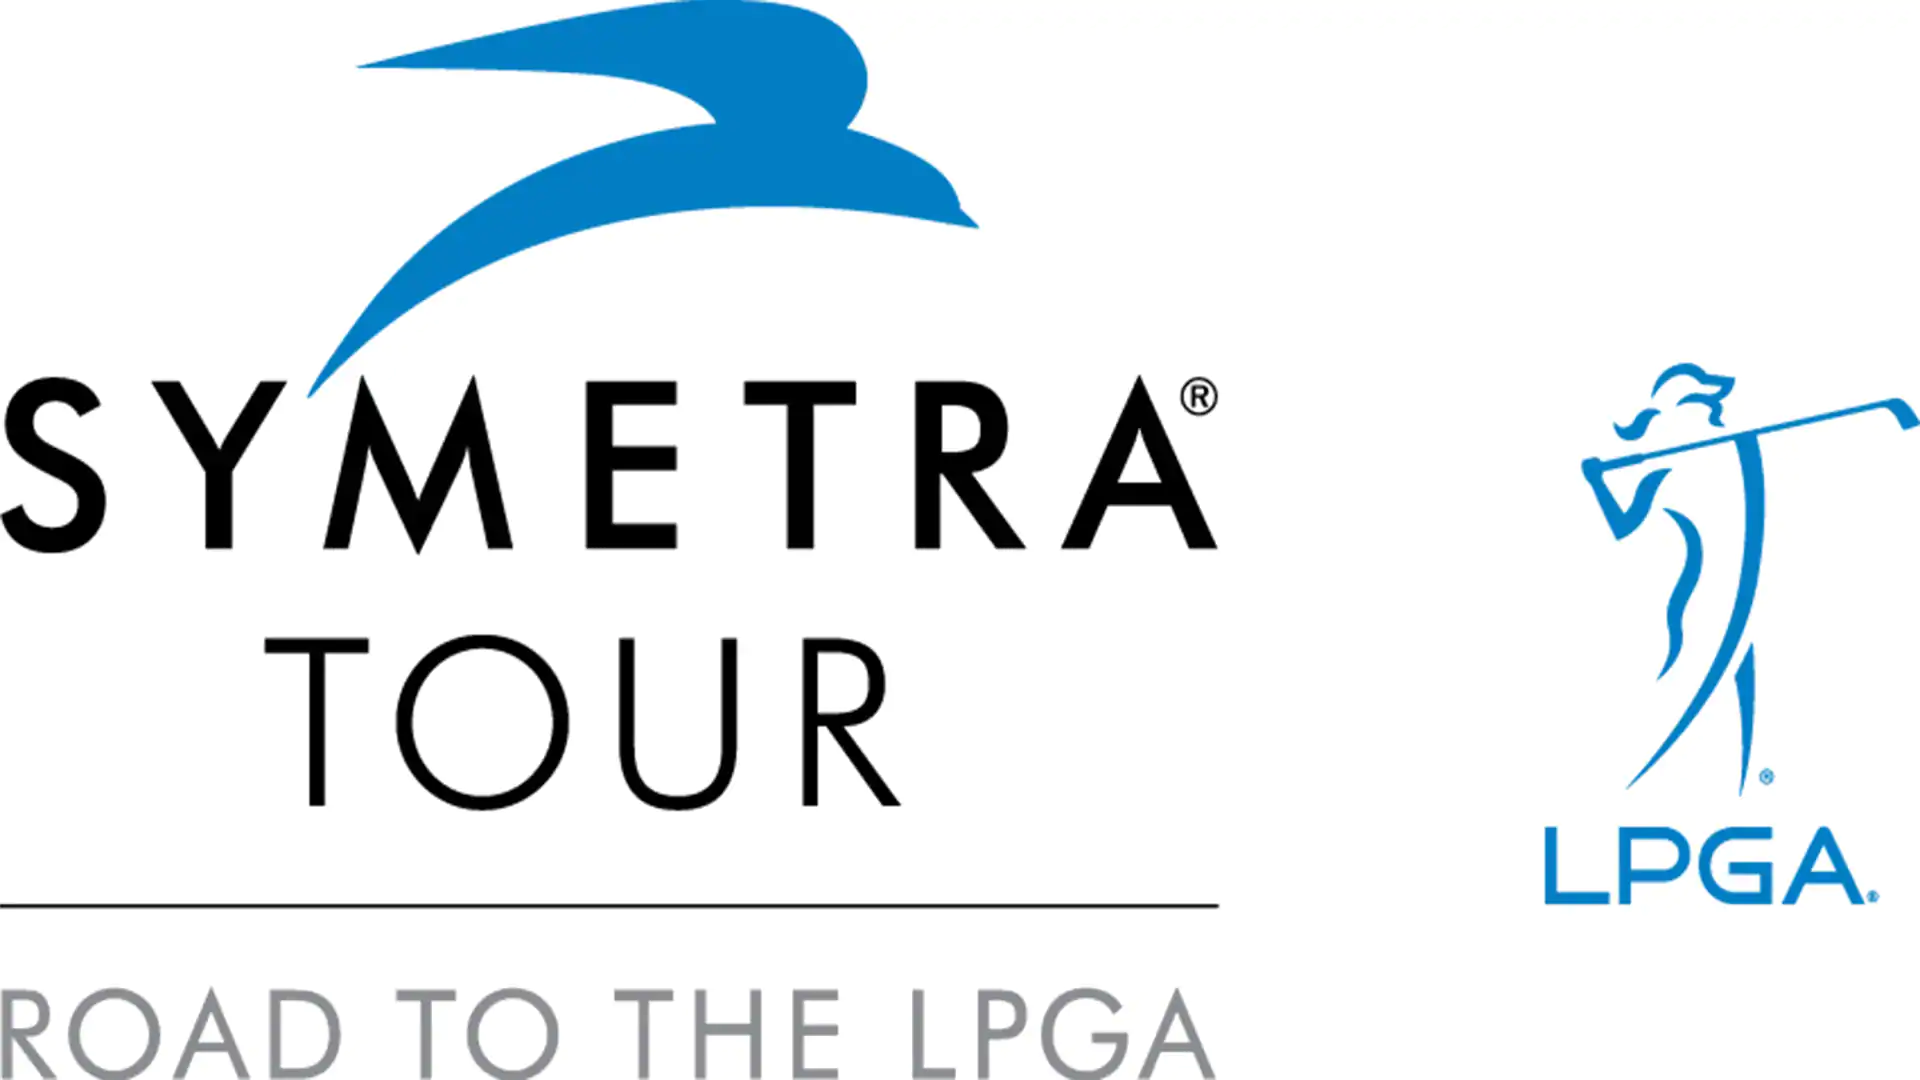 Symetra Tour schedule features 24 events, more than $4 million in prize money